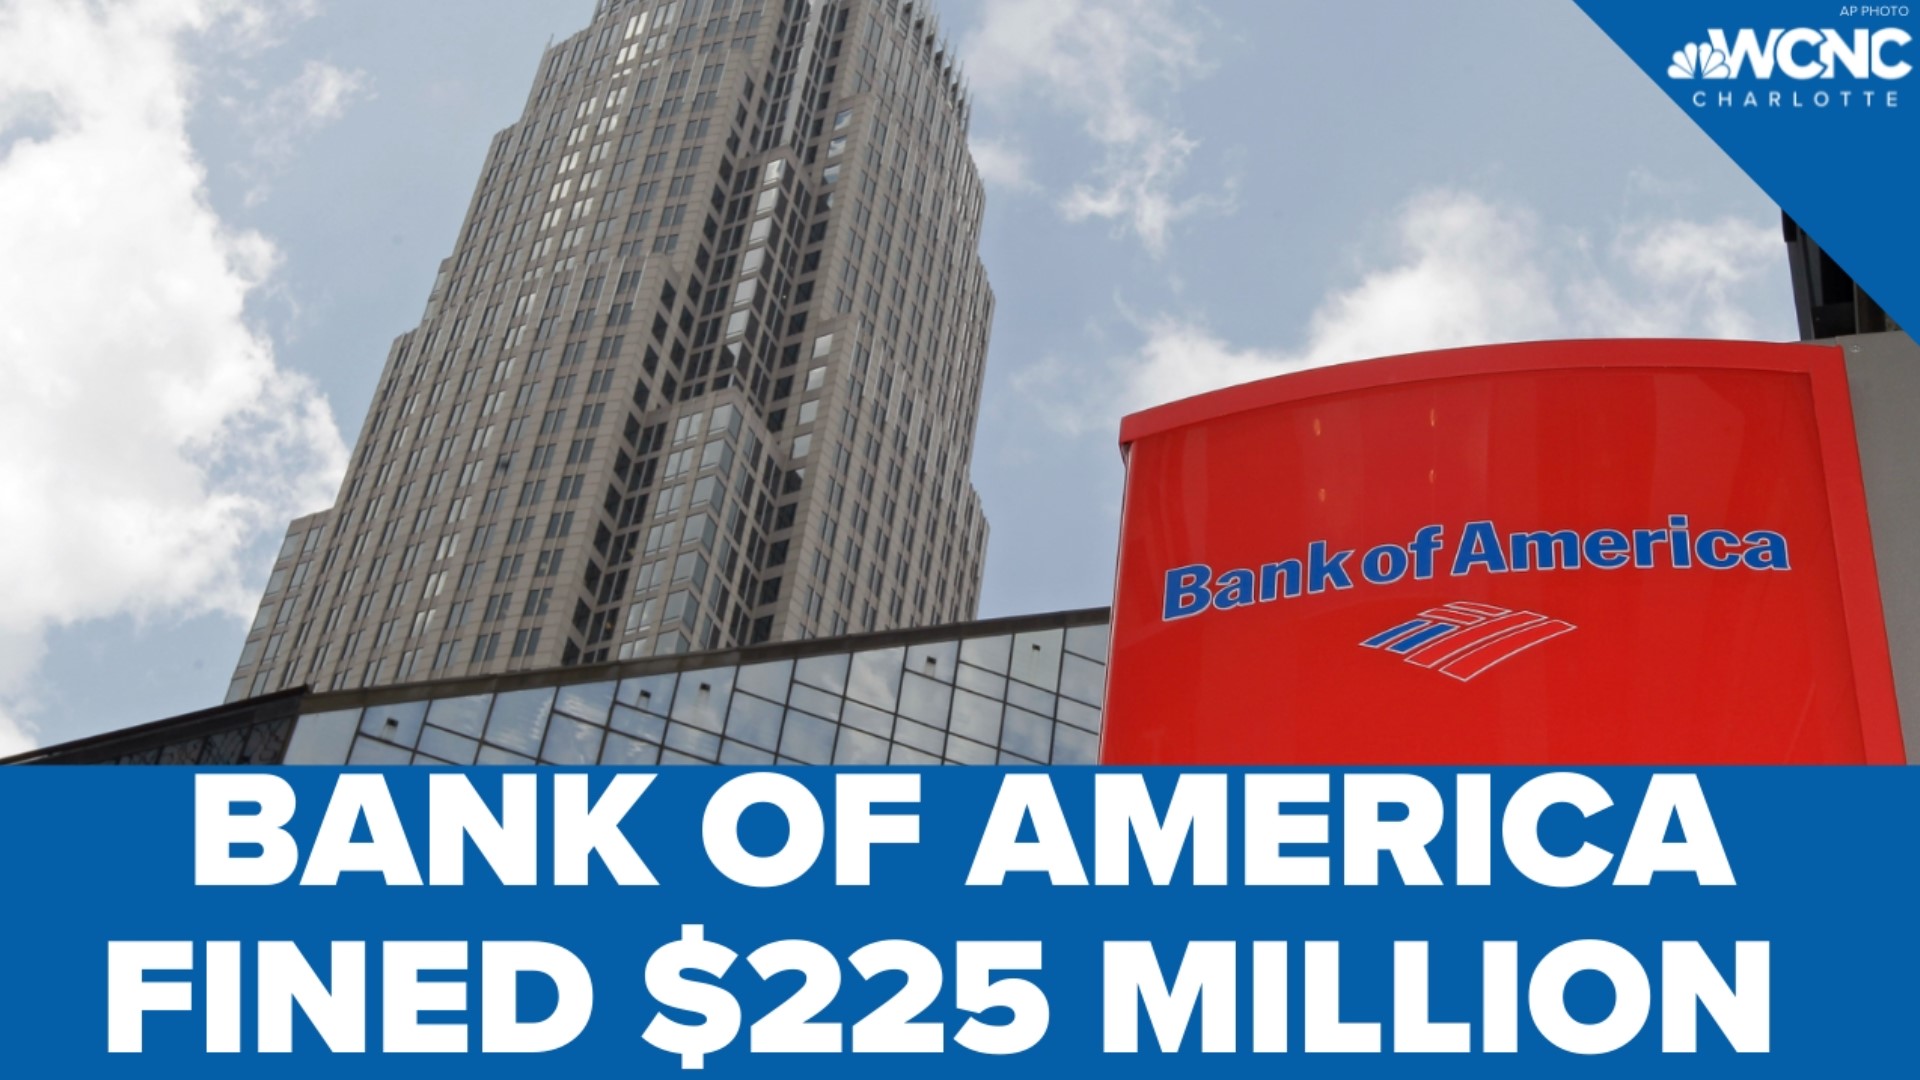 Bank of America now facing a hefty fine over how it handled its unemployment benefits program during the pandemic.